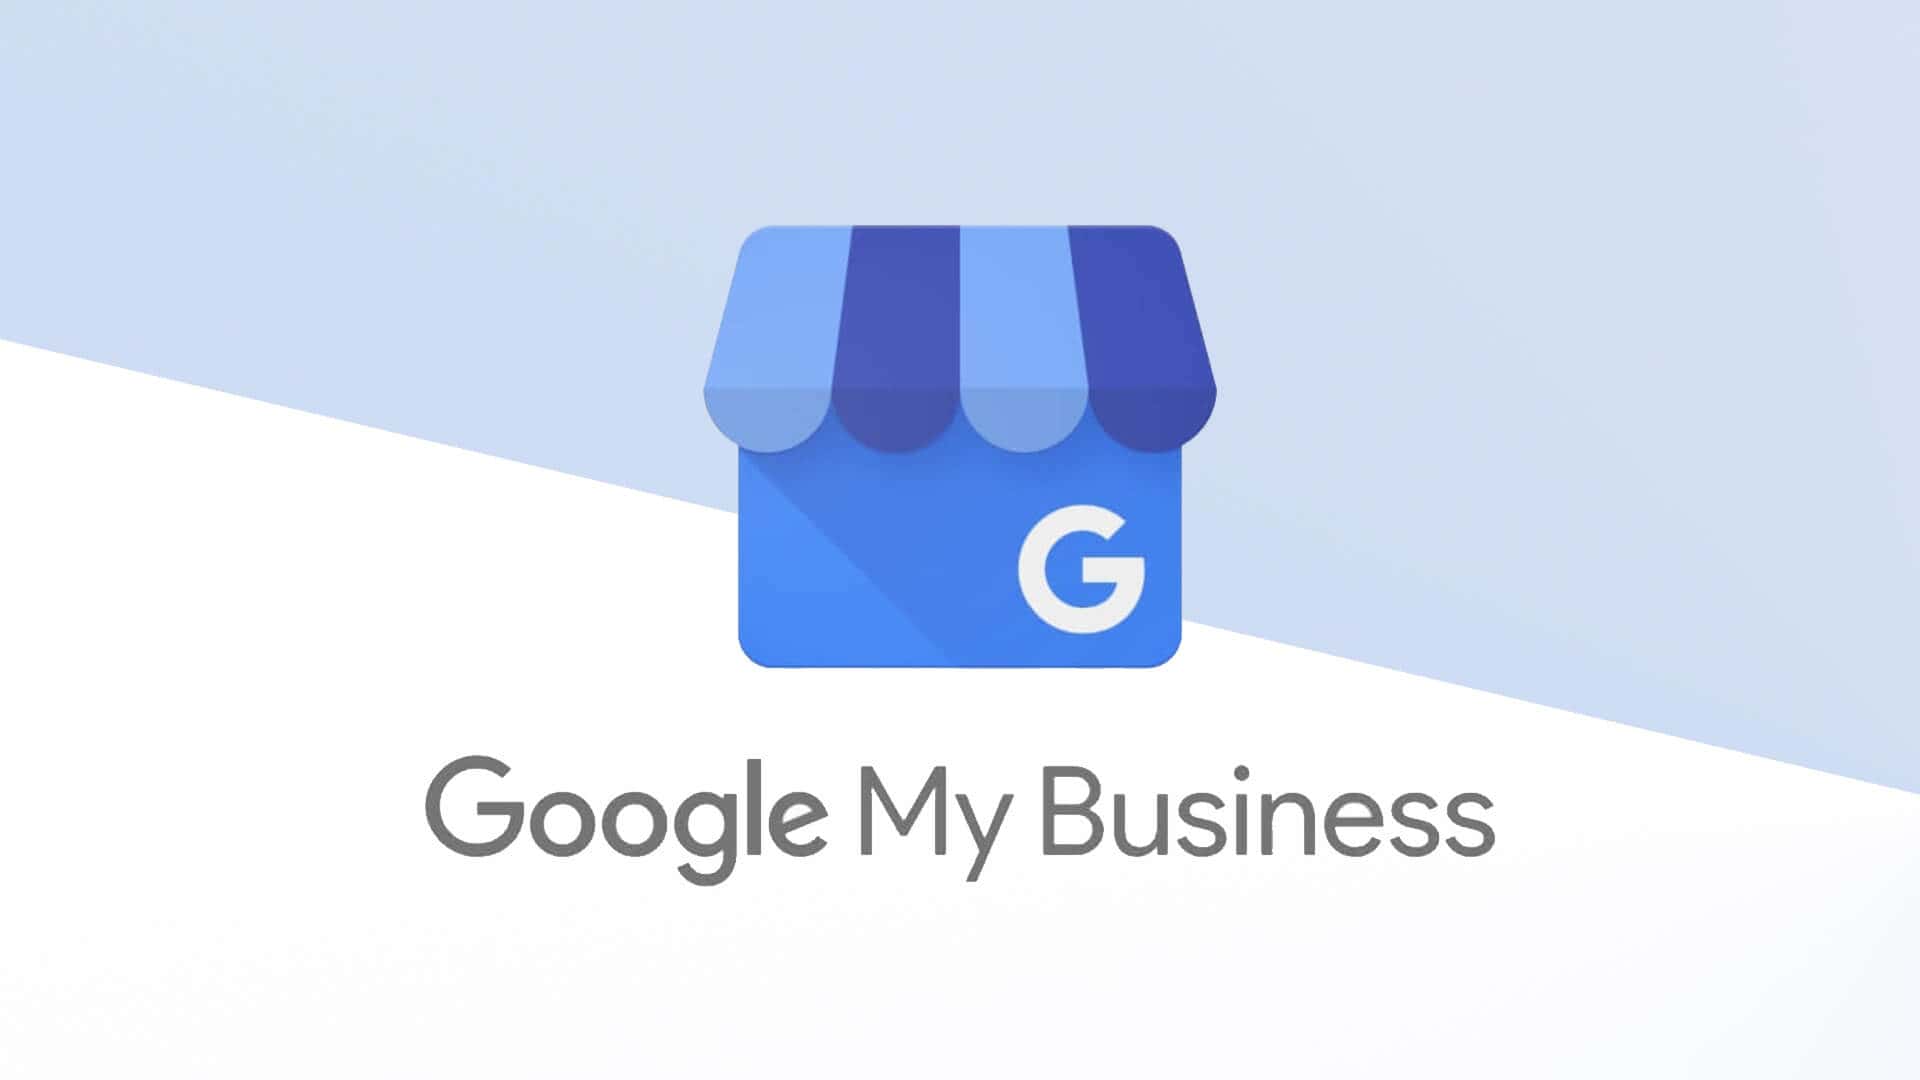 SEO - Google my business and Google maps